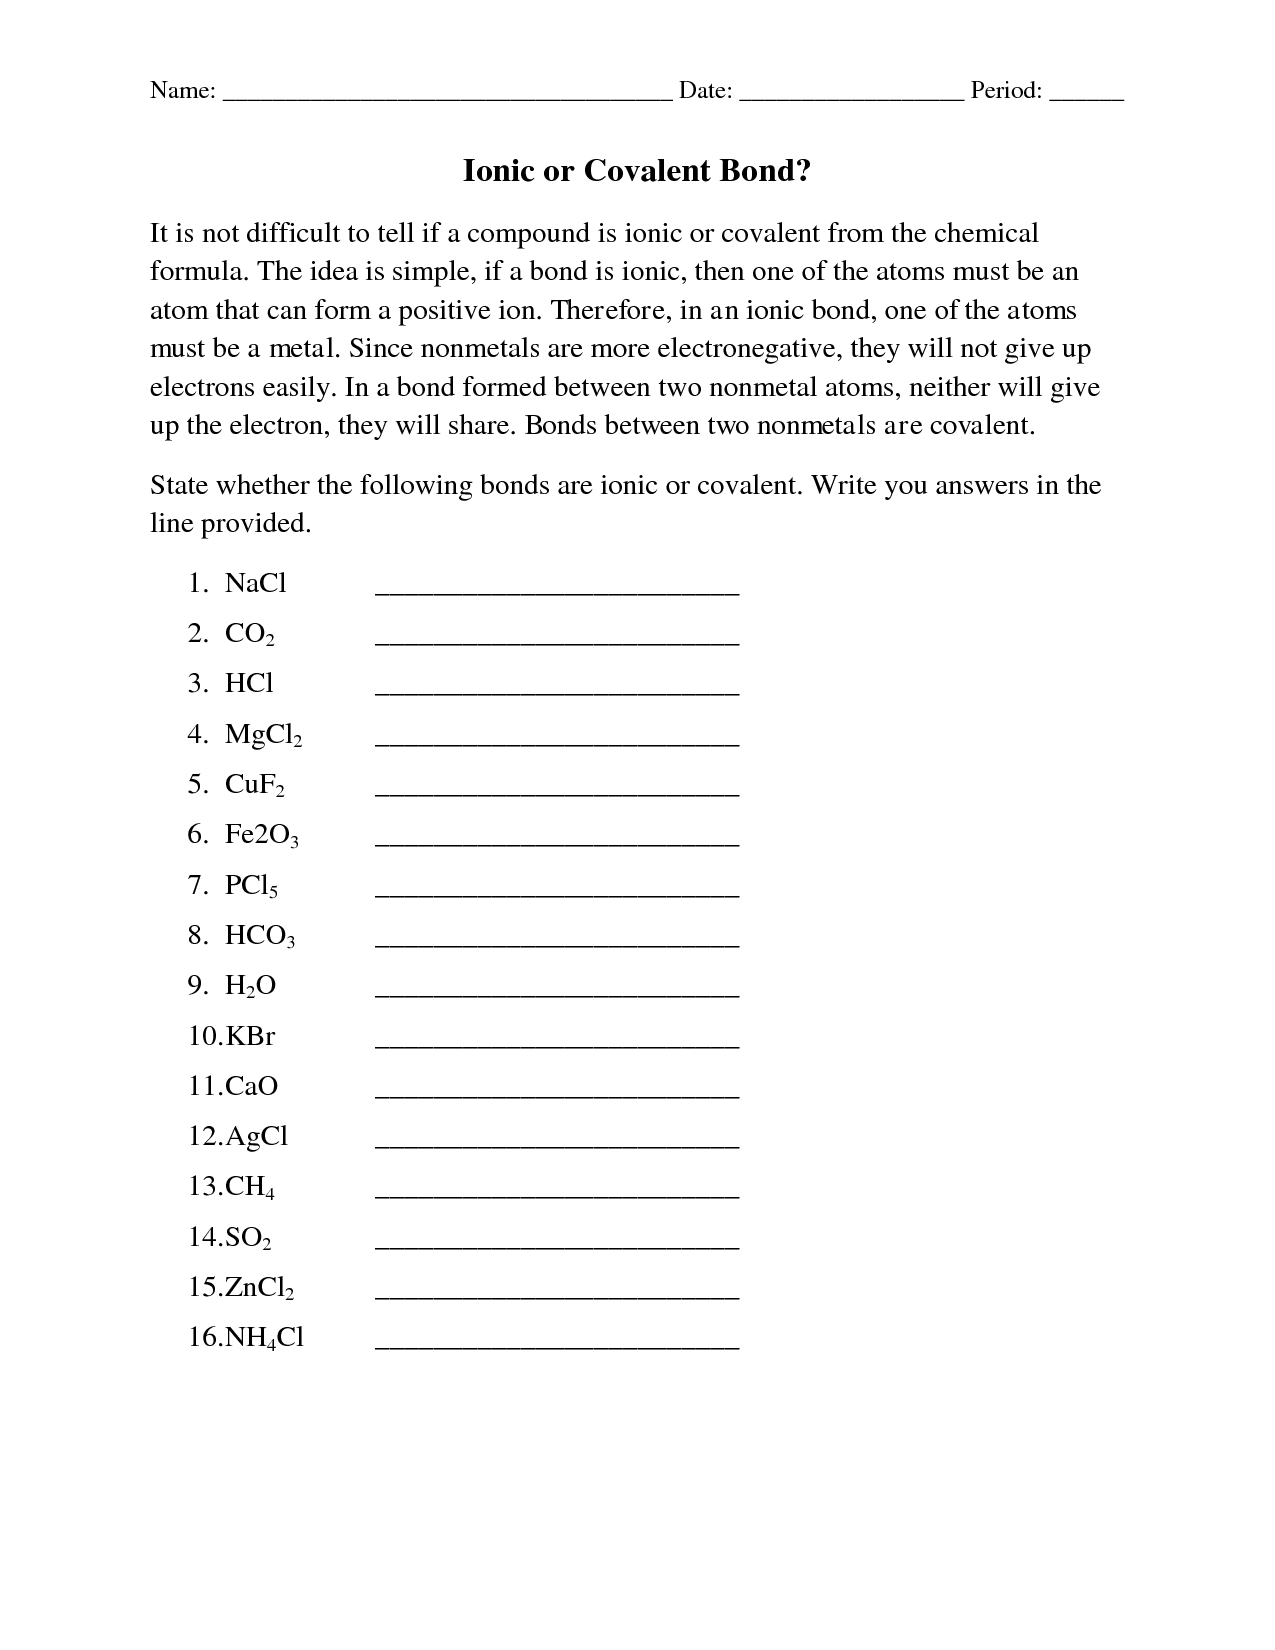 Ionic and Covalent Bonds Worksheet Image